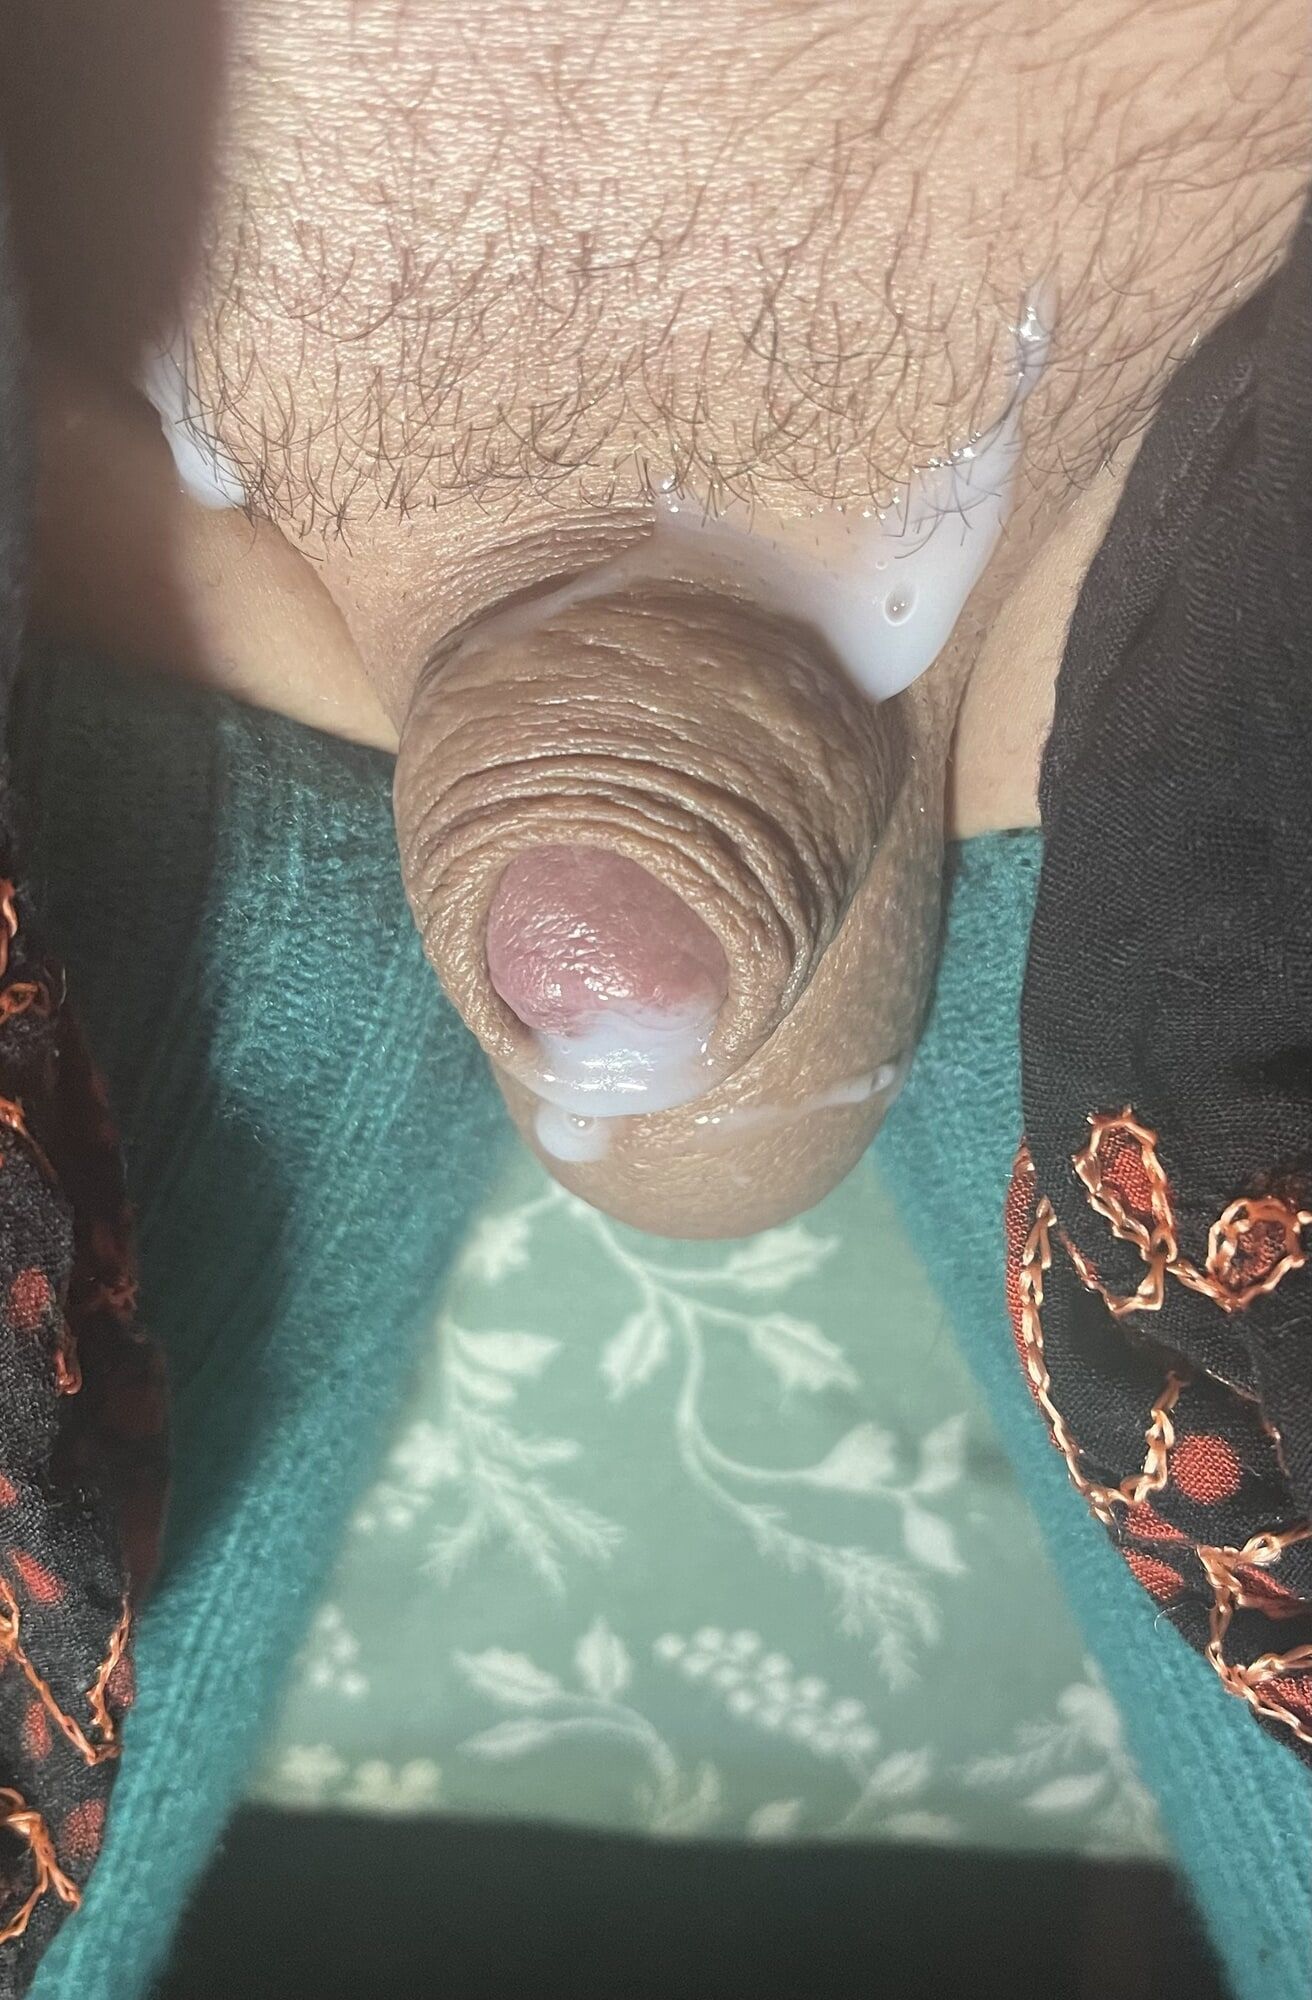 Tiny cock bitch dick any takers #14